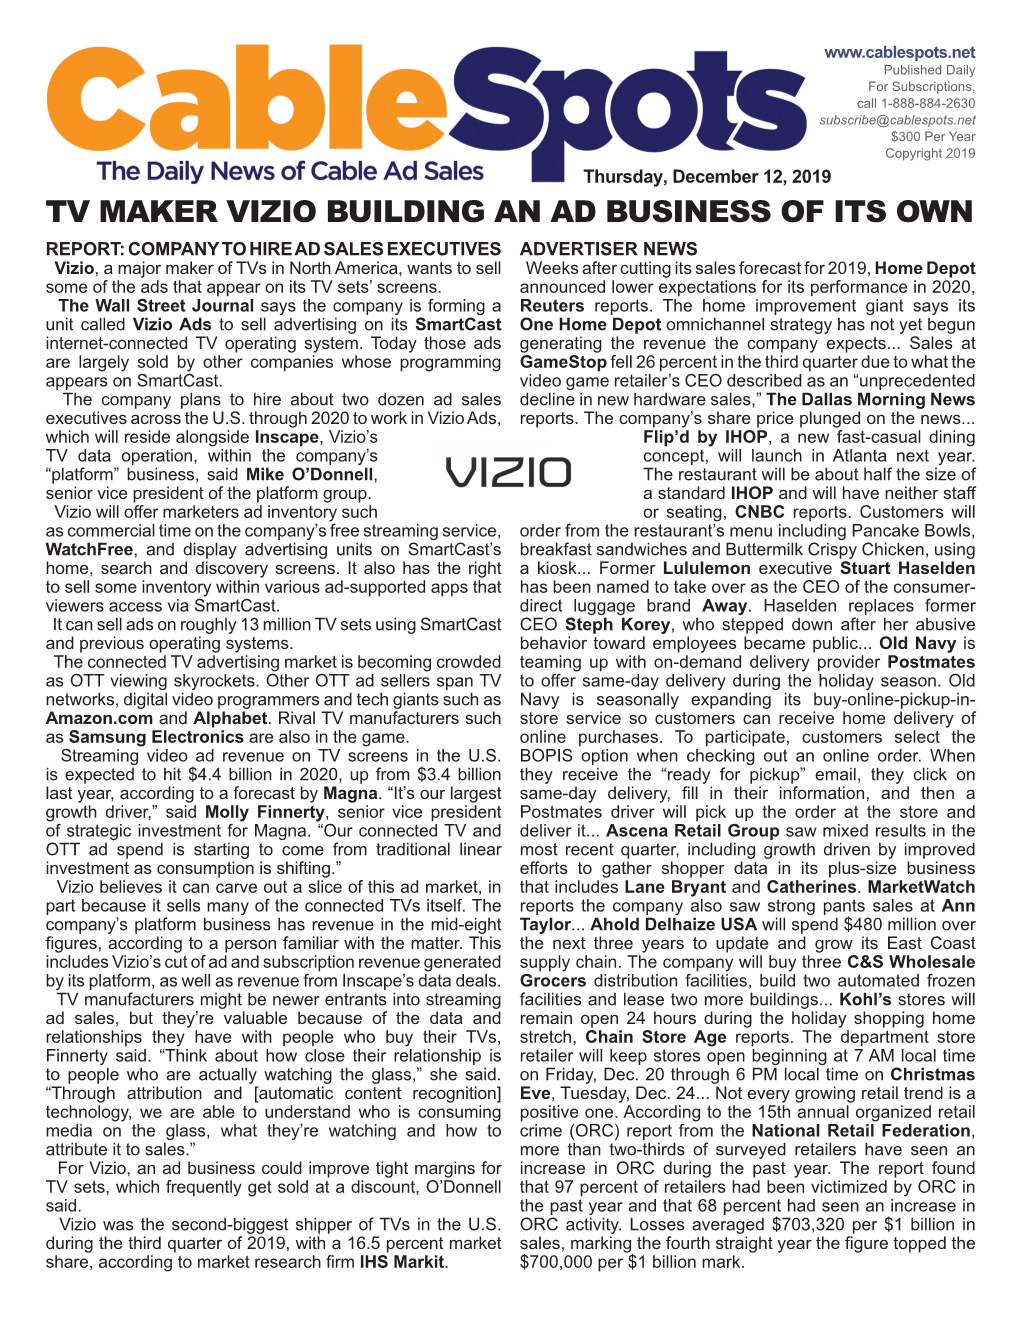 Tv Maker Vizio Building an Ad Business of Its